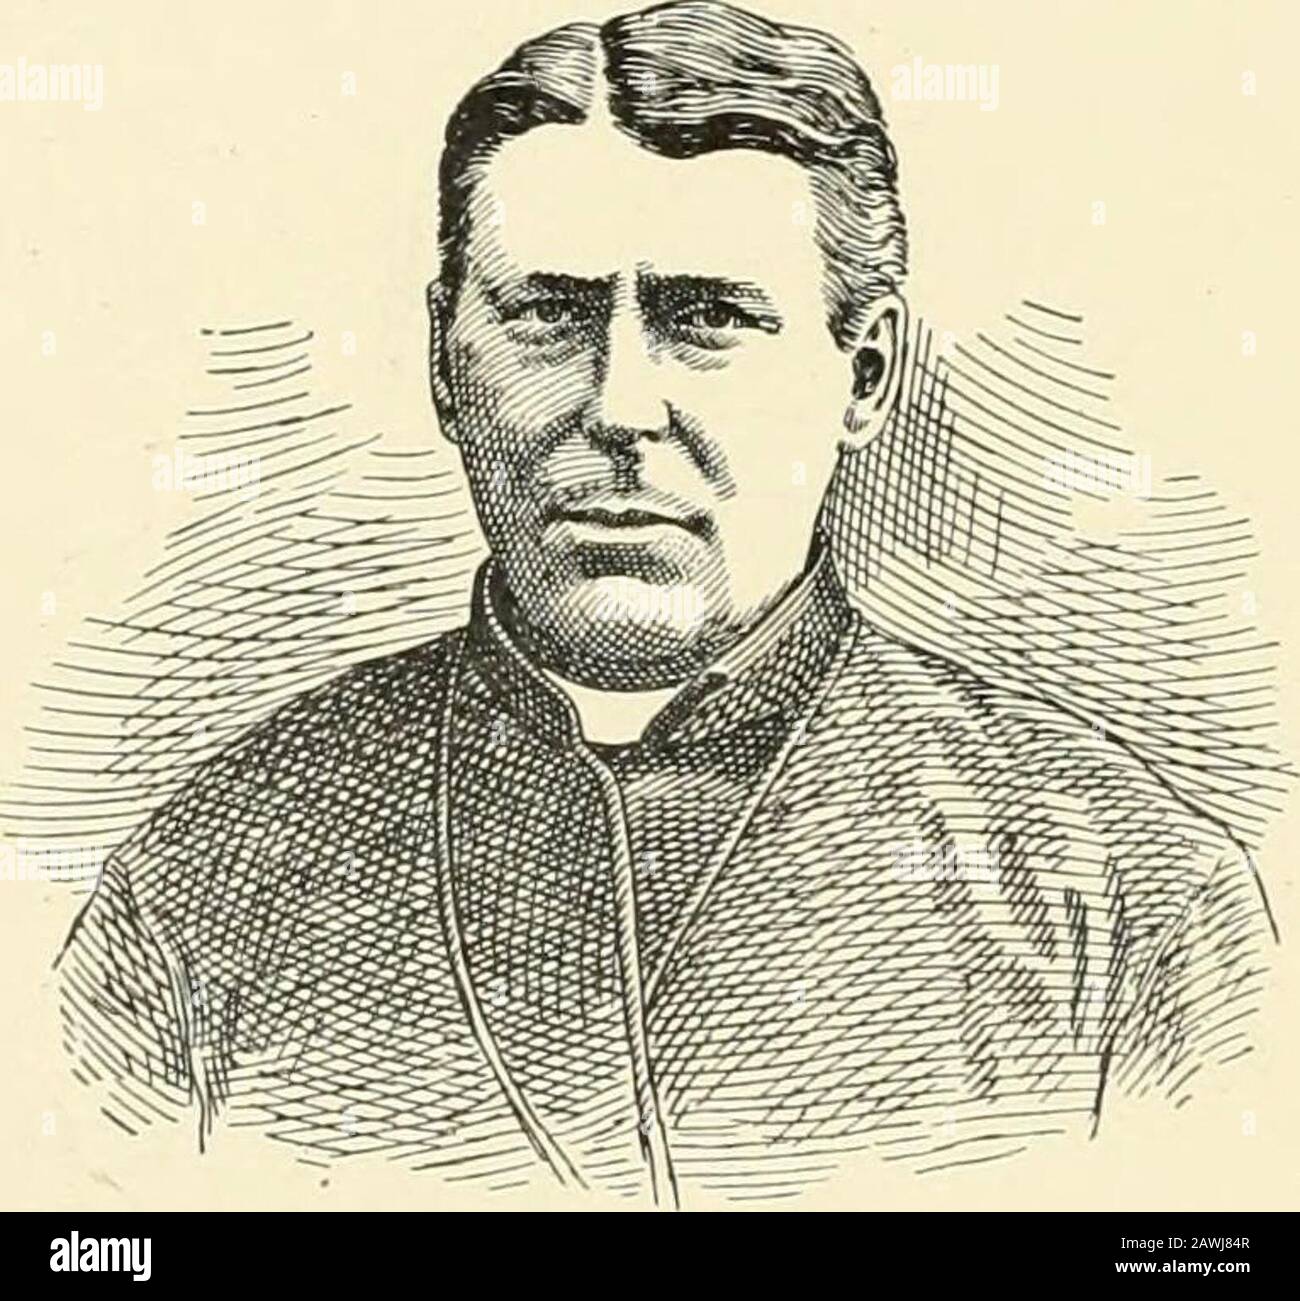 History of the diocese of Sault Ste, Marie and Marquette; containing a full and accurate account of the development of the Catholic church in upper Michigan, with portraits of bishops, priests and illustrations of churches old and new . ks; our experience isthat this is about the correct date of ar-rival and departure and have, therefore,adopted it throughout this book. Accord-ing to this. Father Point remained in theSault from July 2, 1846, till the 24th ofthe same month and baptized thirty-fouipersons in that time. Rev. B. Pedelupe,S. J., was his successor but also remainedonly a short time, Stock Photo